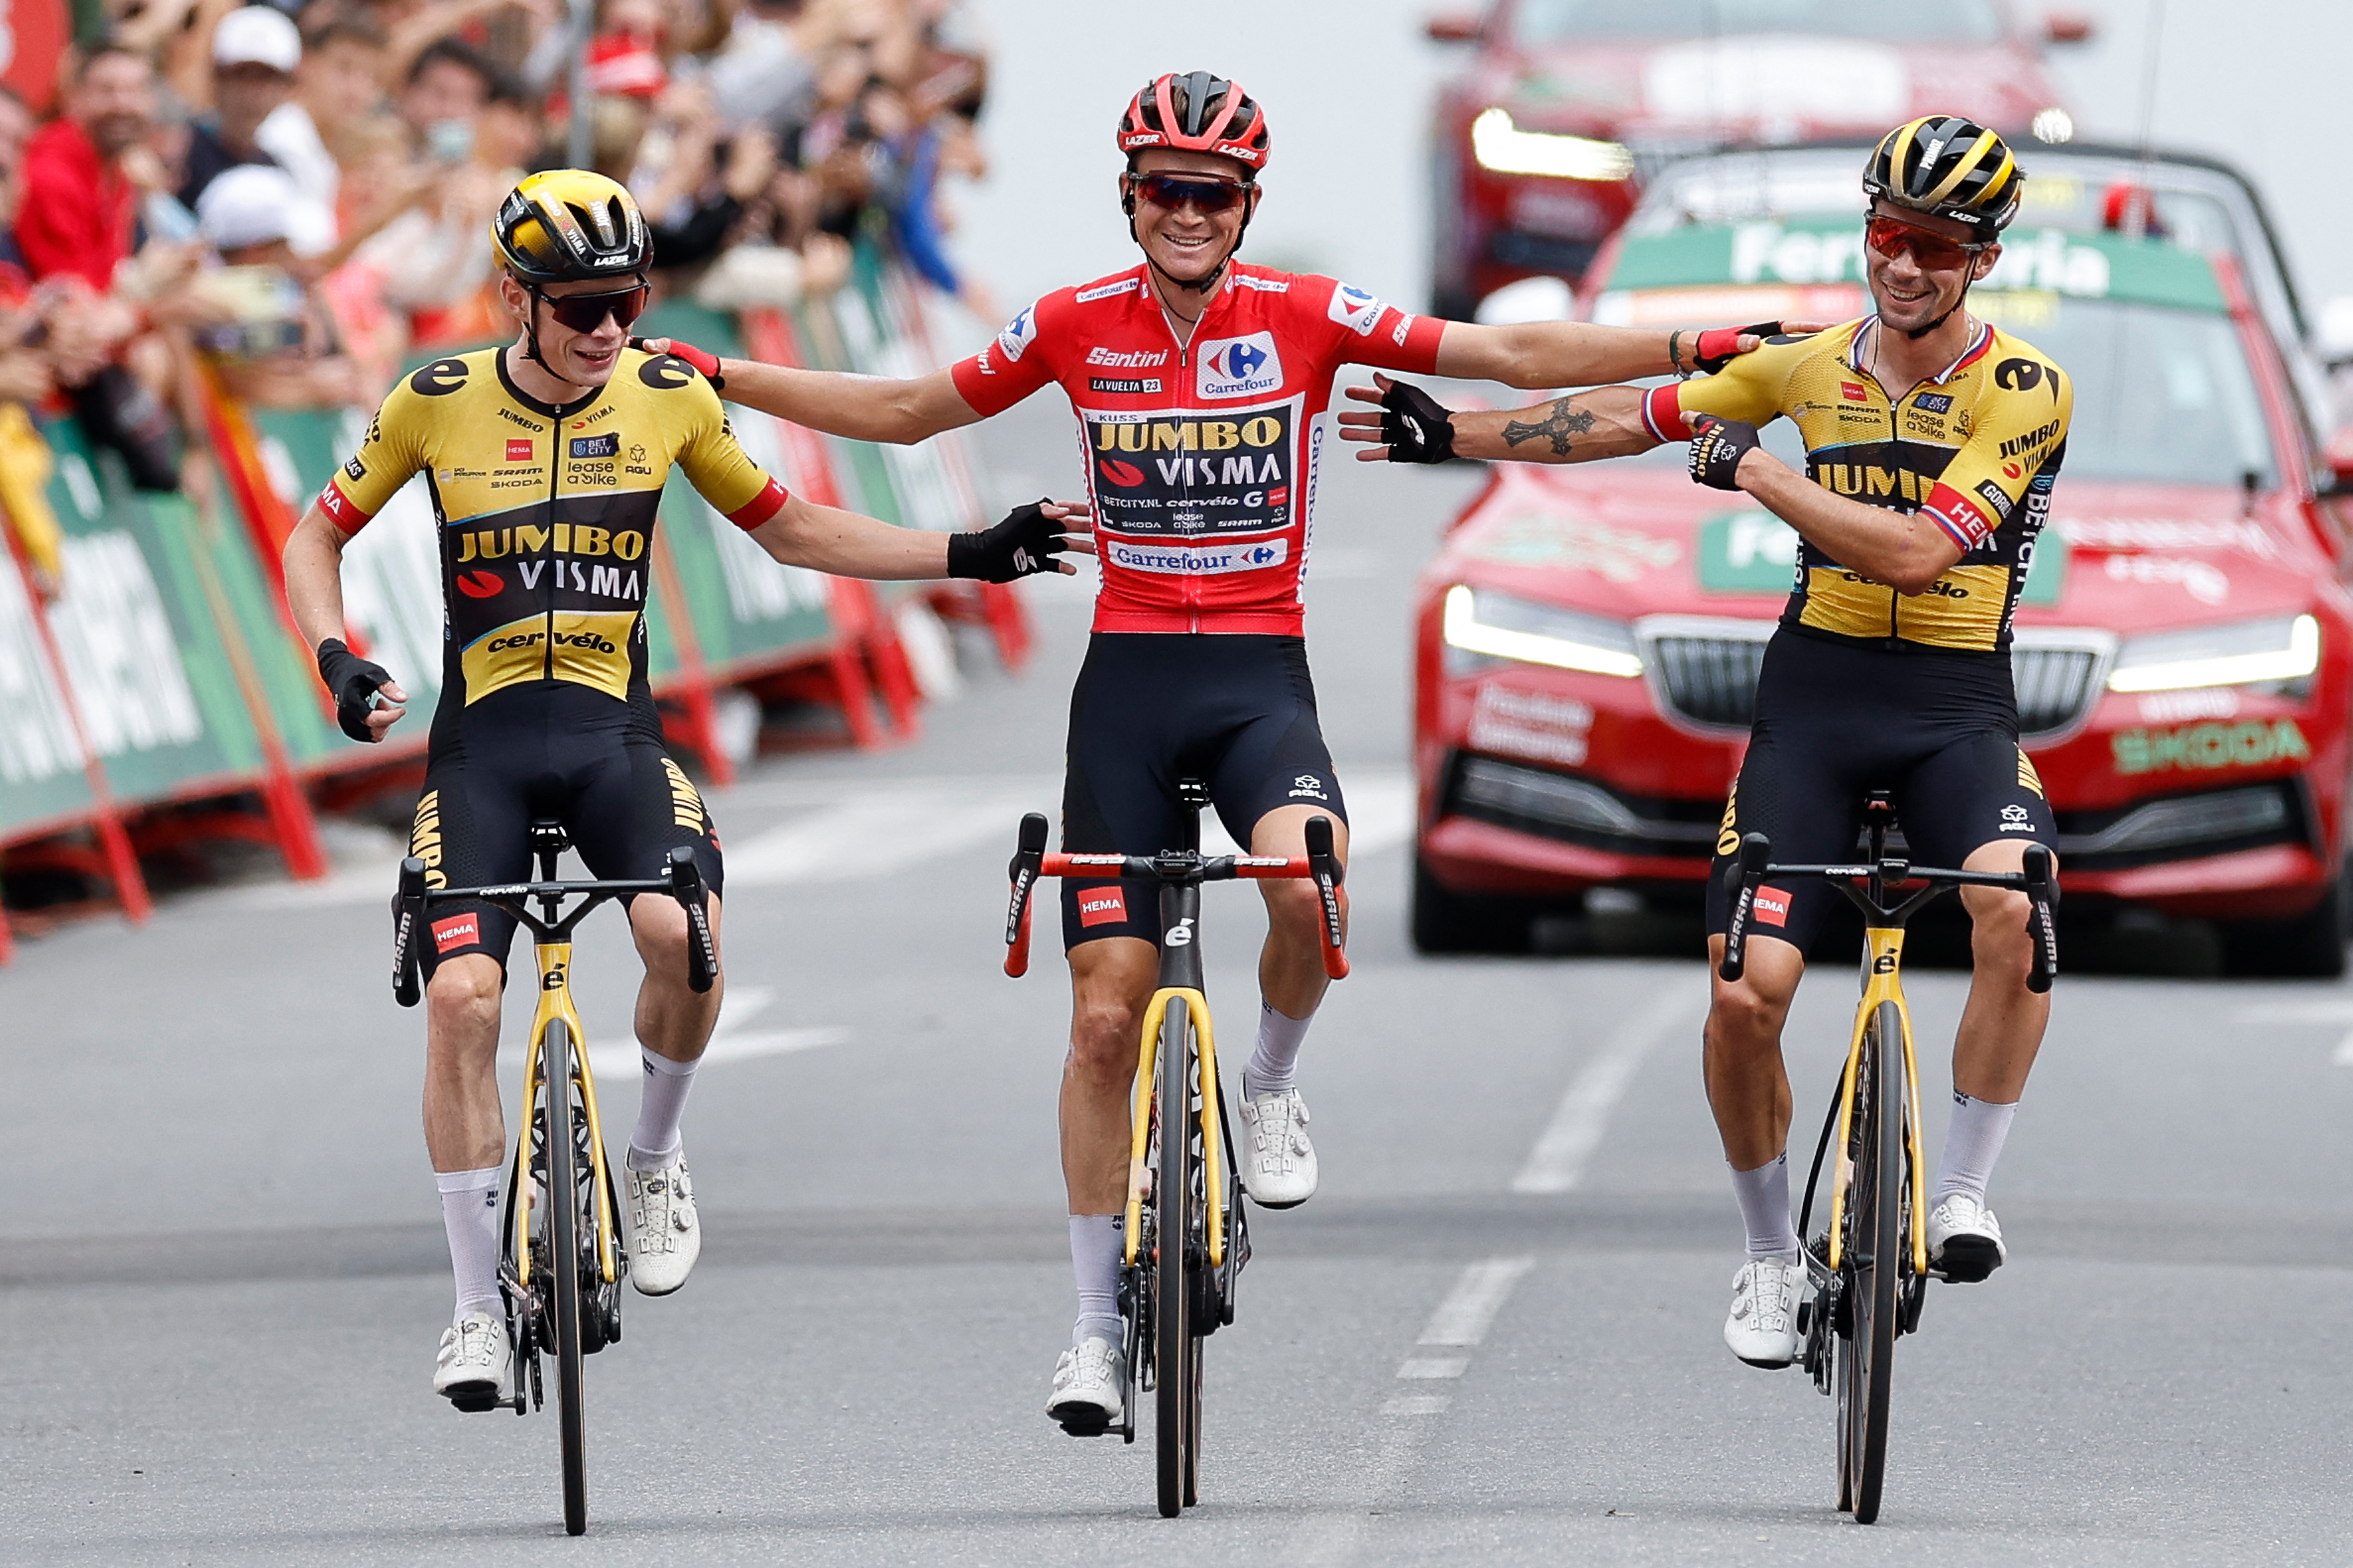 Team Jumbo-Visma's US rider Sepp Kuss, wearing the overall leader jersey (C) celebrates with Team Jumbo-Visma's Danish rider Jonas Vingegaard (L) and Team Jumbo's Slovenian rider Primoz Roglic as he crosses the finish line of the stage 20 of the 2023 La Vuelta cycling tour of Spain, a 207,8 km race between Manzanares el Real and Guadarrama, on September 16, 2023. (Photo by Oscar DEL POZO / AFP) (Photo by OSCAR DEL POZO/AFP via Getty Images)